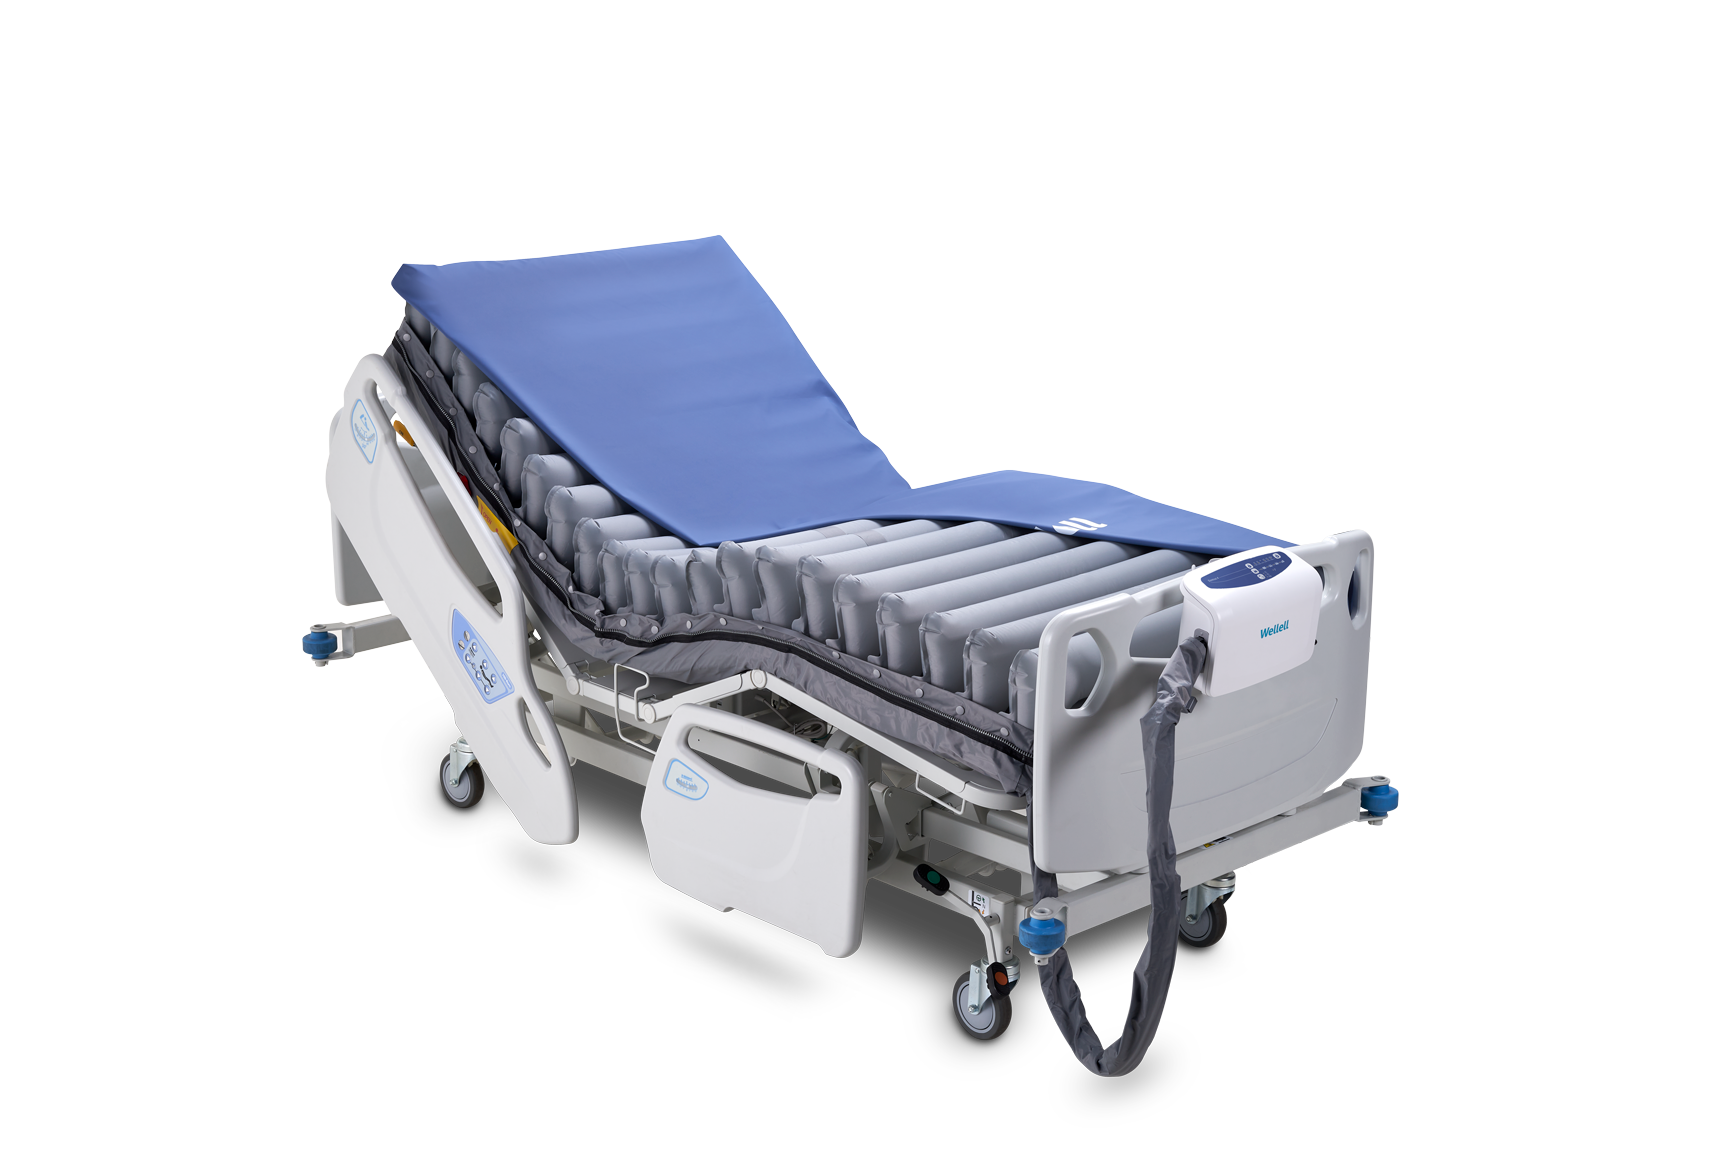 Domus 4  -medical bed-US wellell